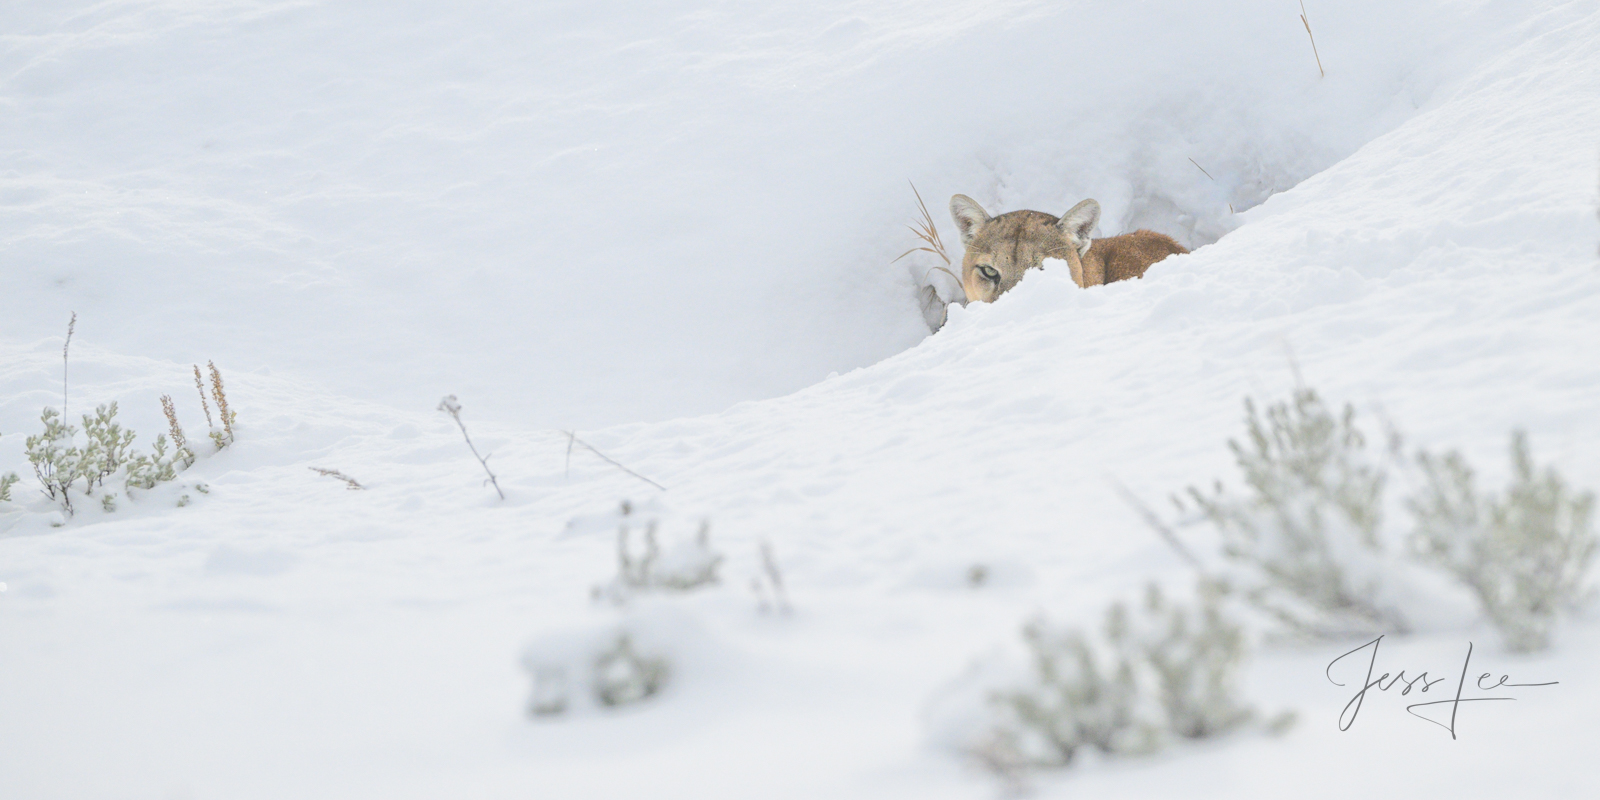 Wild Mountain Photo | Pictures taken in the wild by a chance encounter while searching for iconic western North American predators...